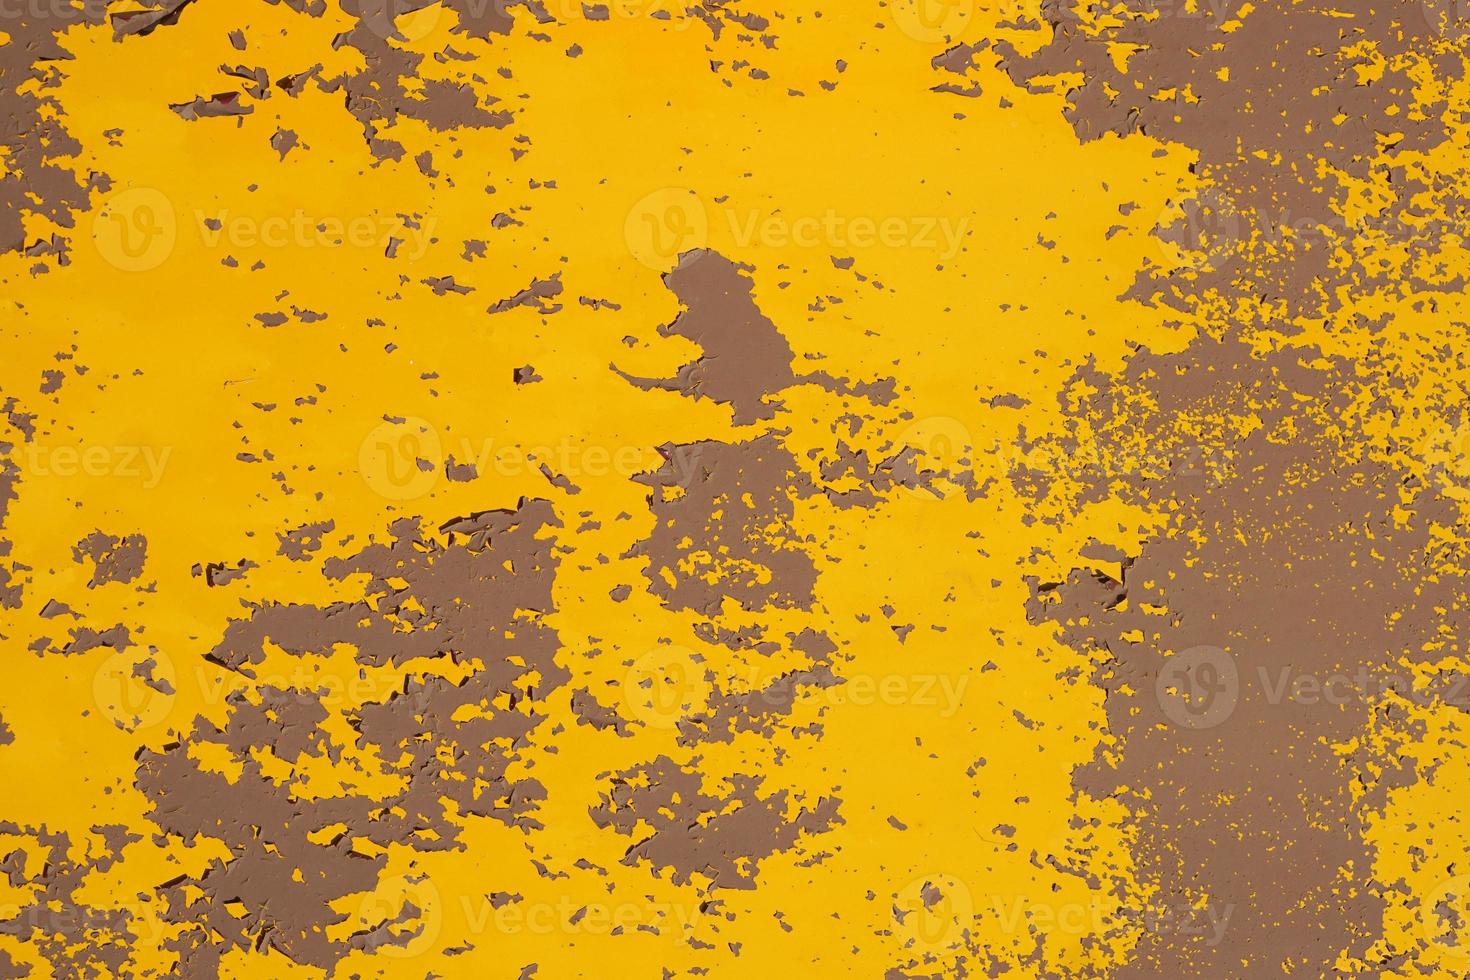 Old yellow grungy metal wall with peeling paint and rusty spots, industrial background photo texture